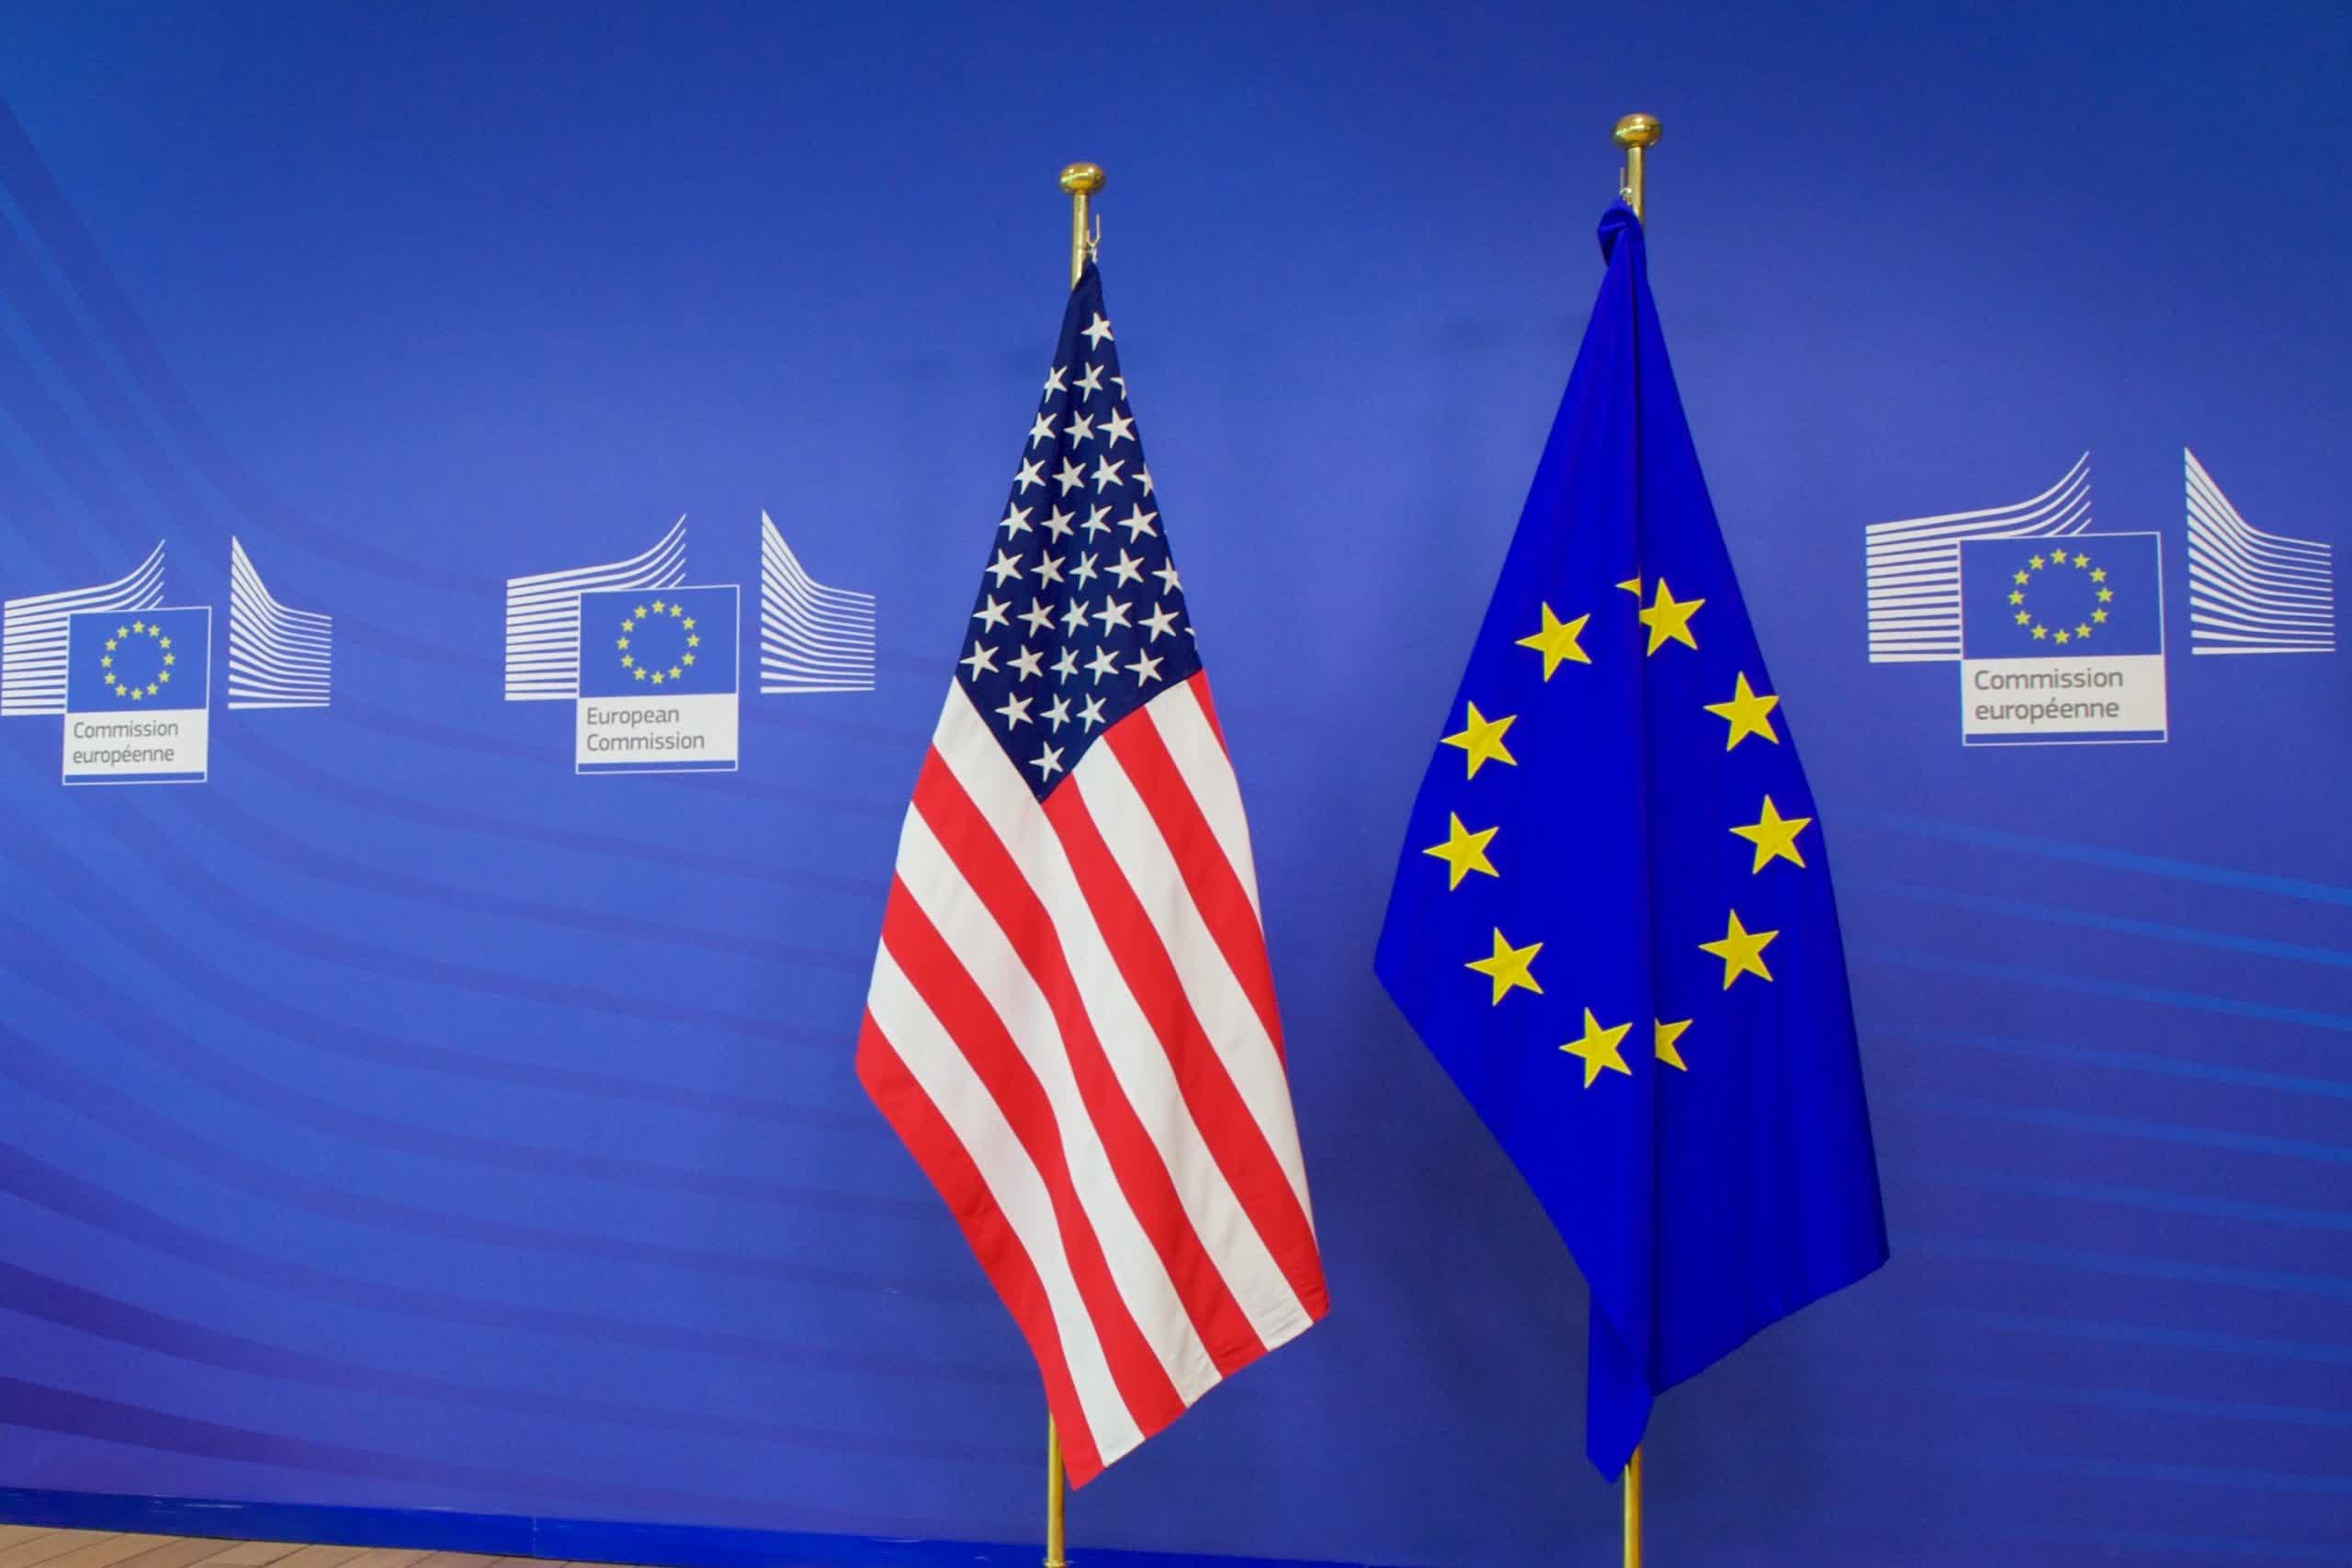 The US and EU will work together on artificial intelligence models